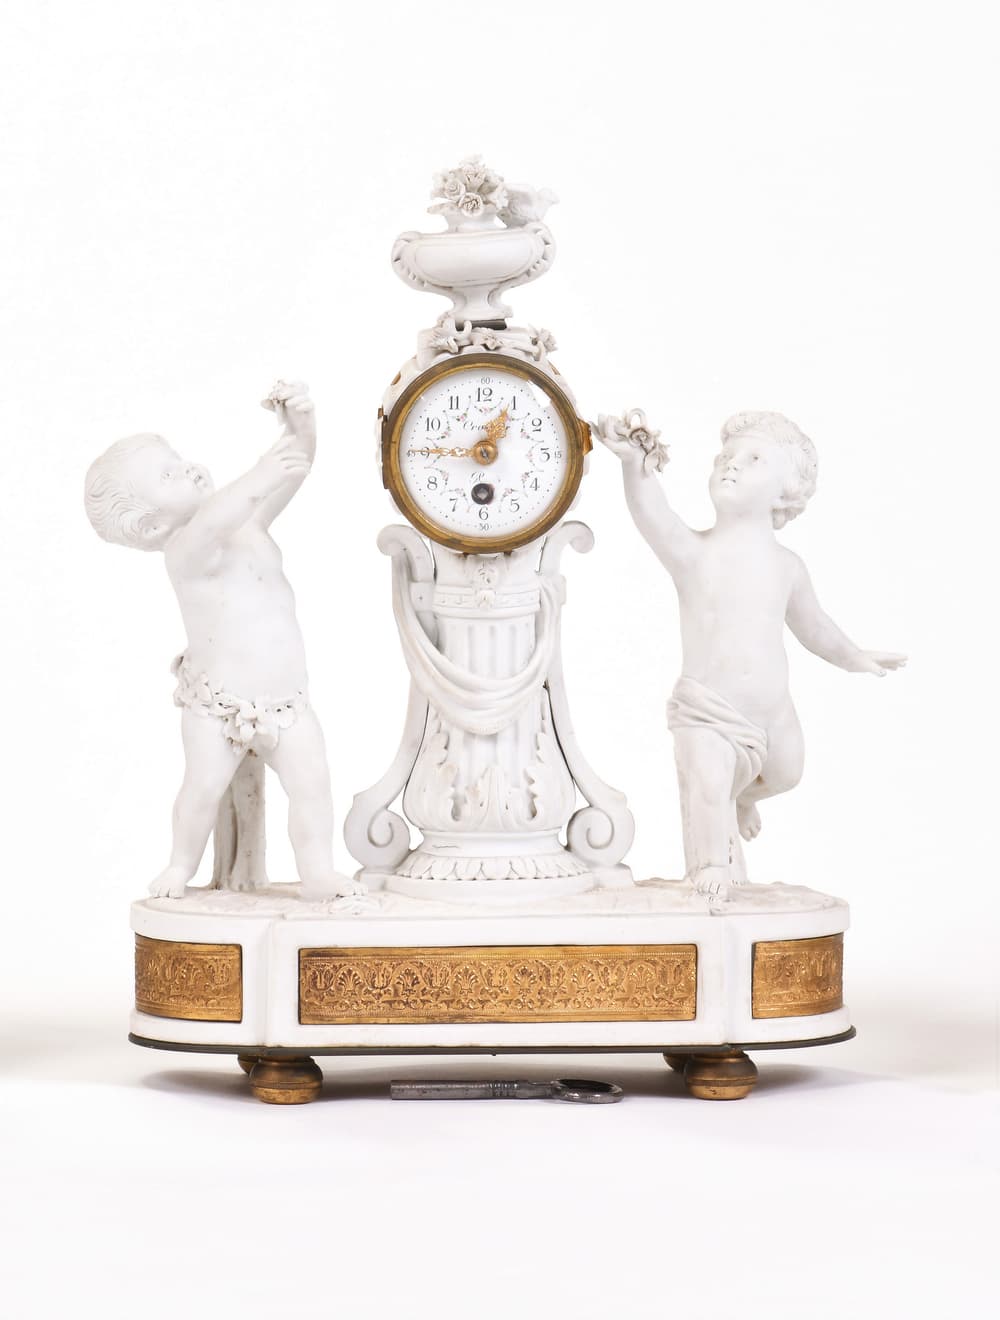 FIREPLACE CLOCK DECORATED WITH PUTTI AND GARLAND OF FLOWERS, 18th century